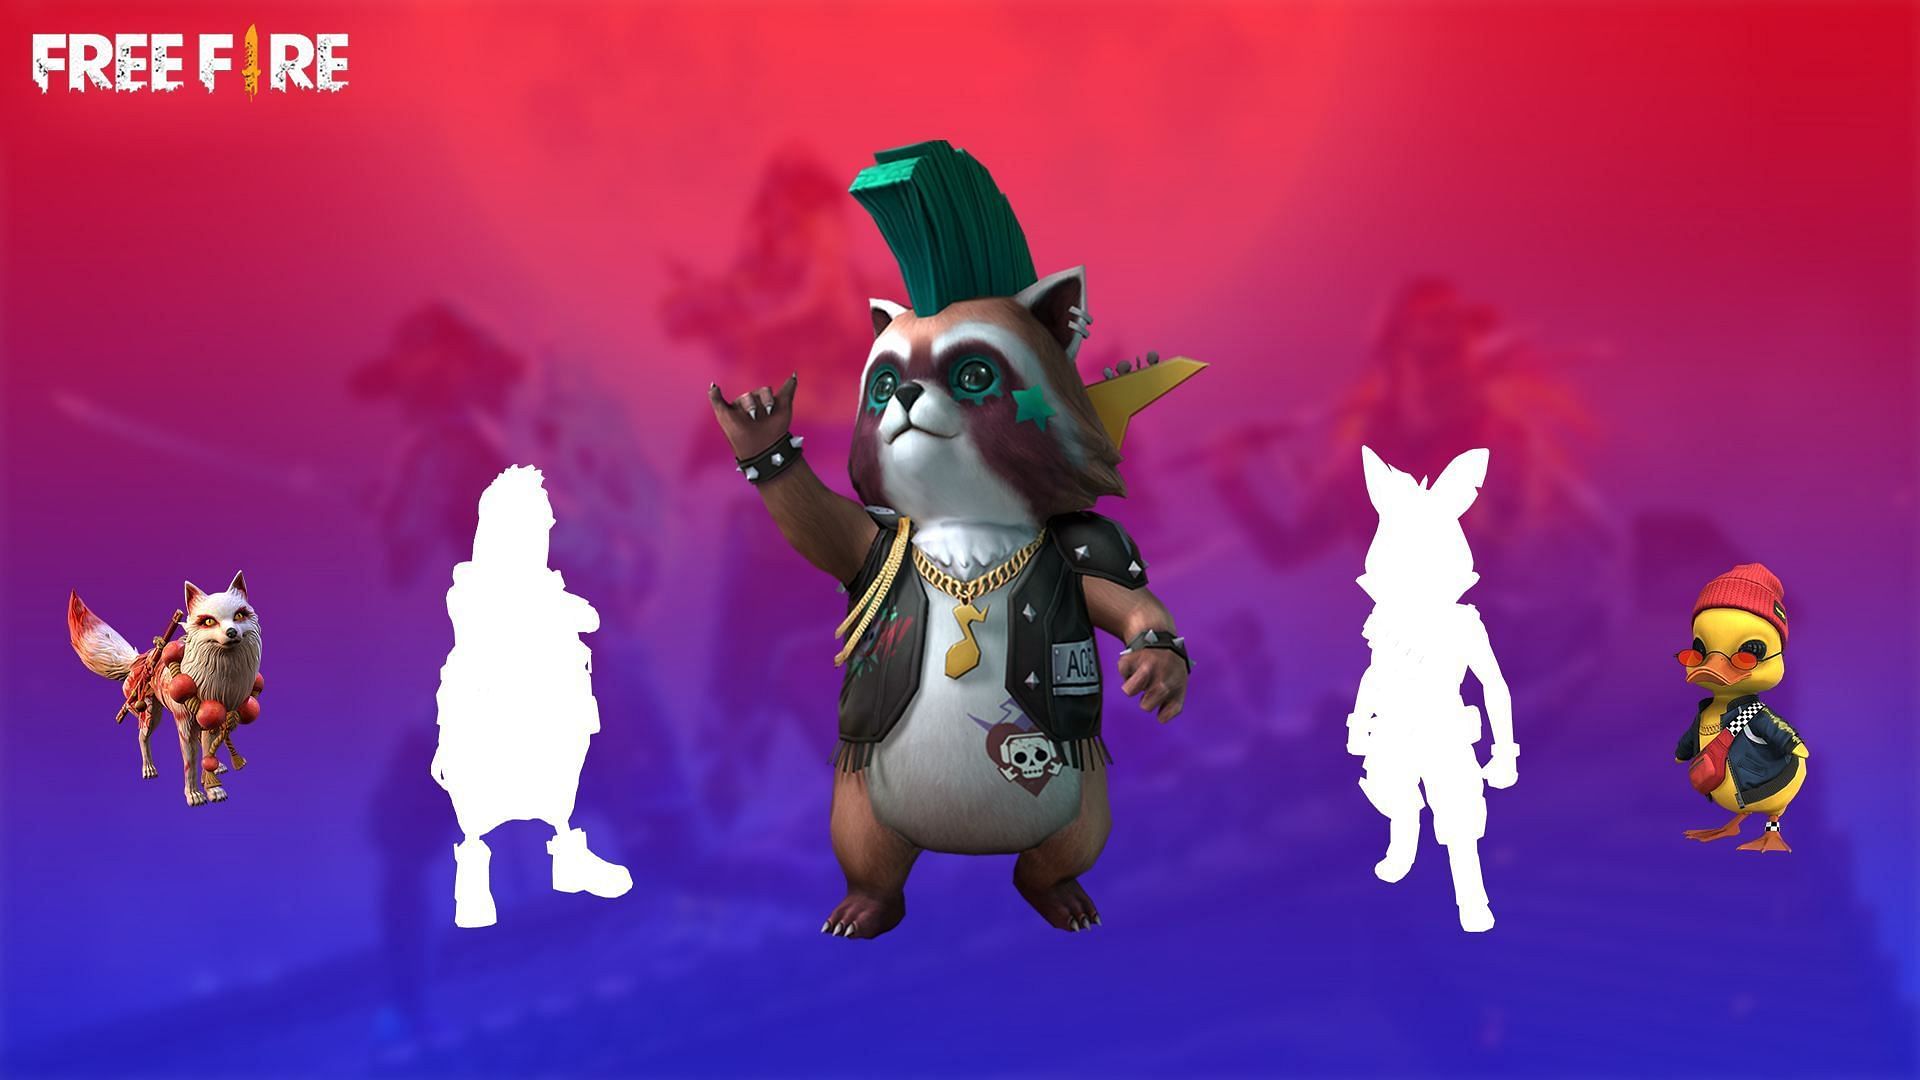 These Free Fire pets are really helpful on the battlegrounds (Image via Sportskeeda)